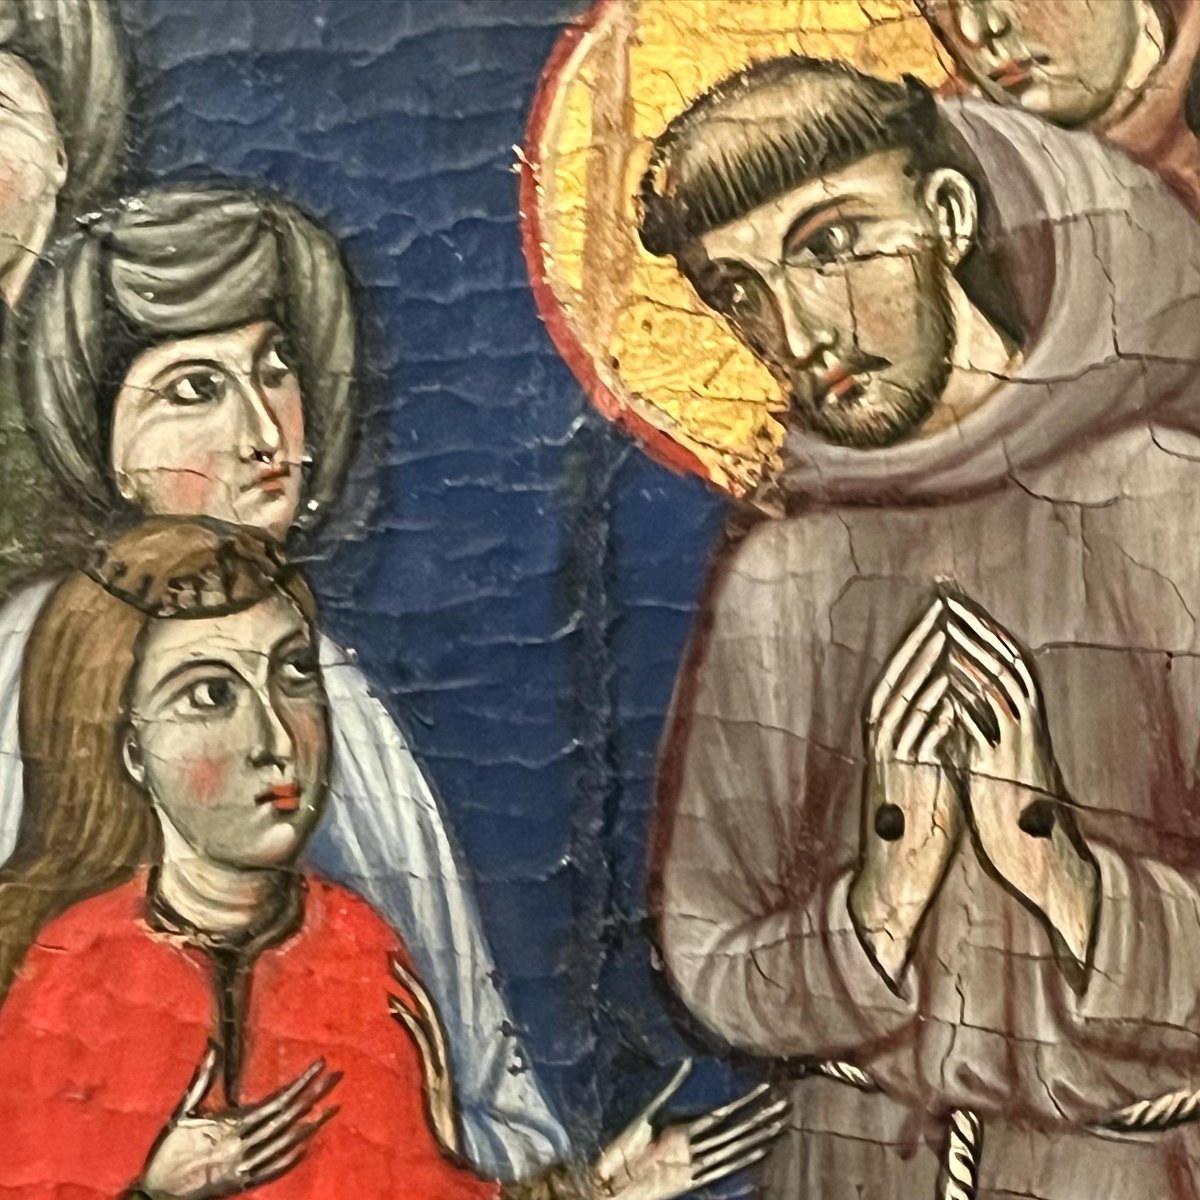 An immediate understanding - Saint Clare and Saint Francis. An incredible loan from Santa Chiara, Assisi, at the Master of Saint Francis exhibition in Perugia.